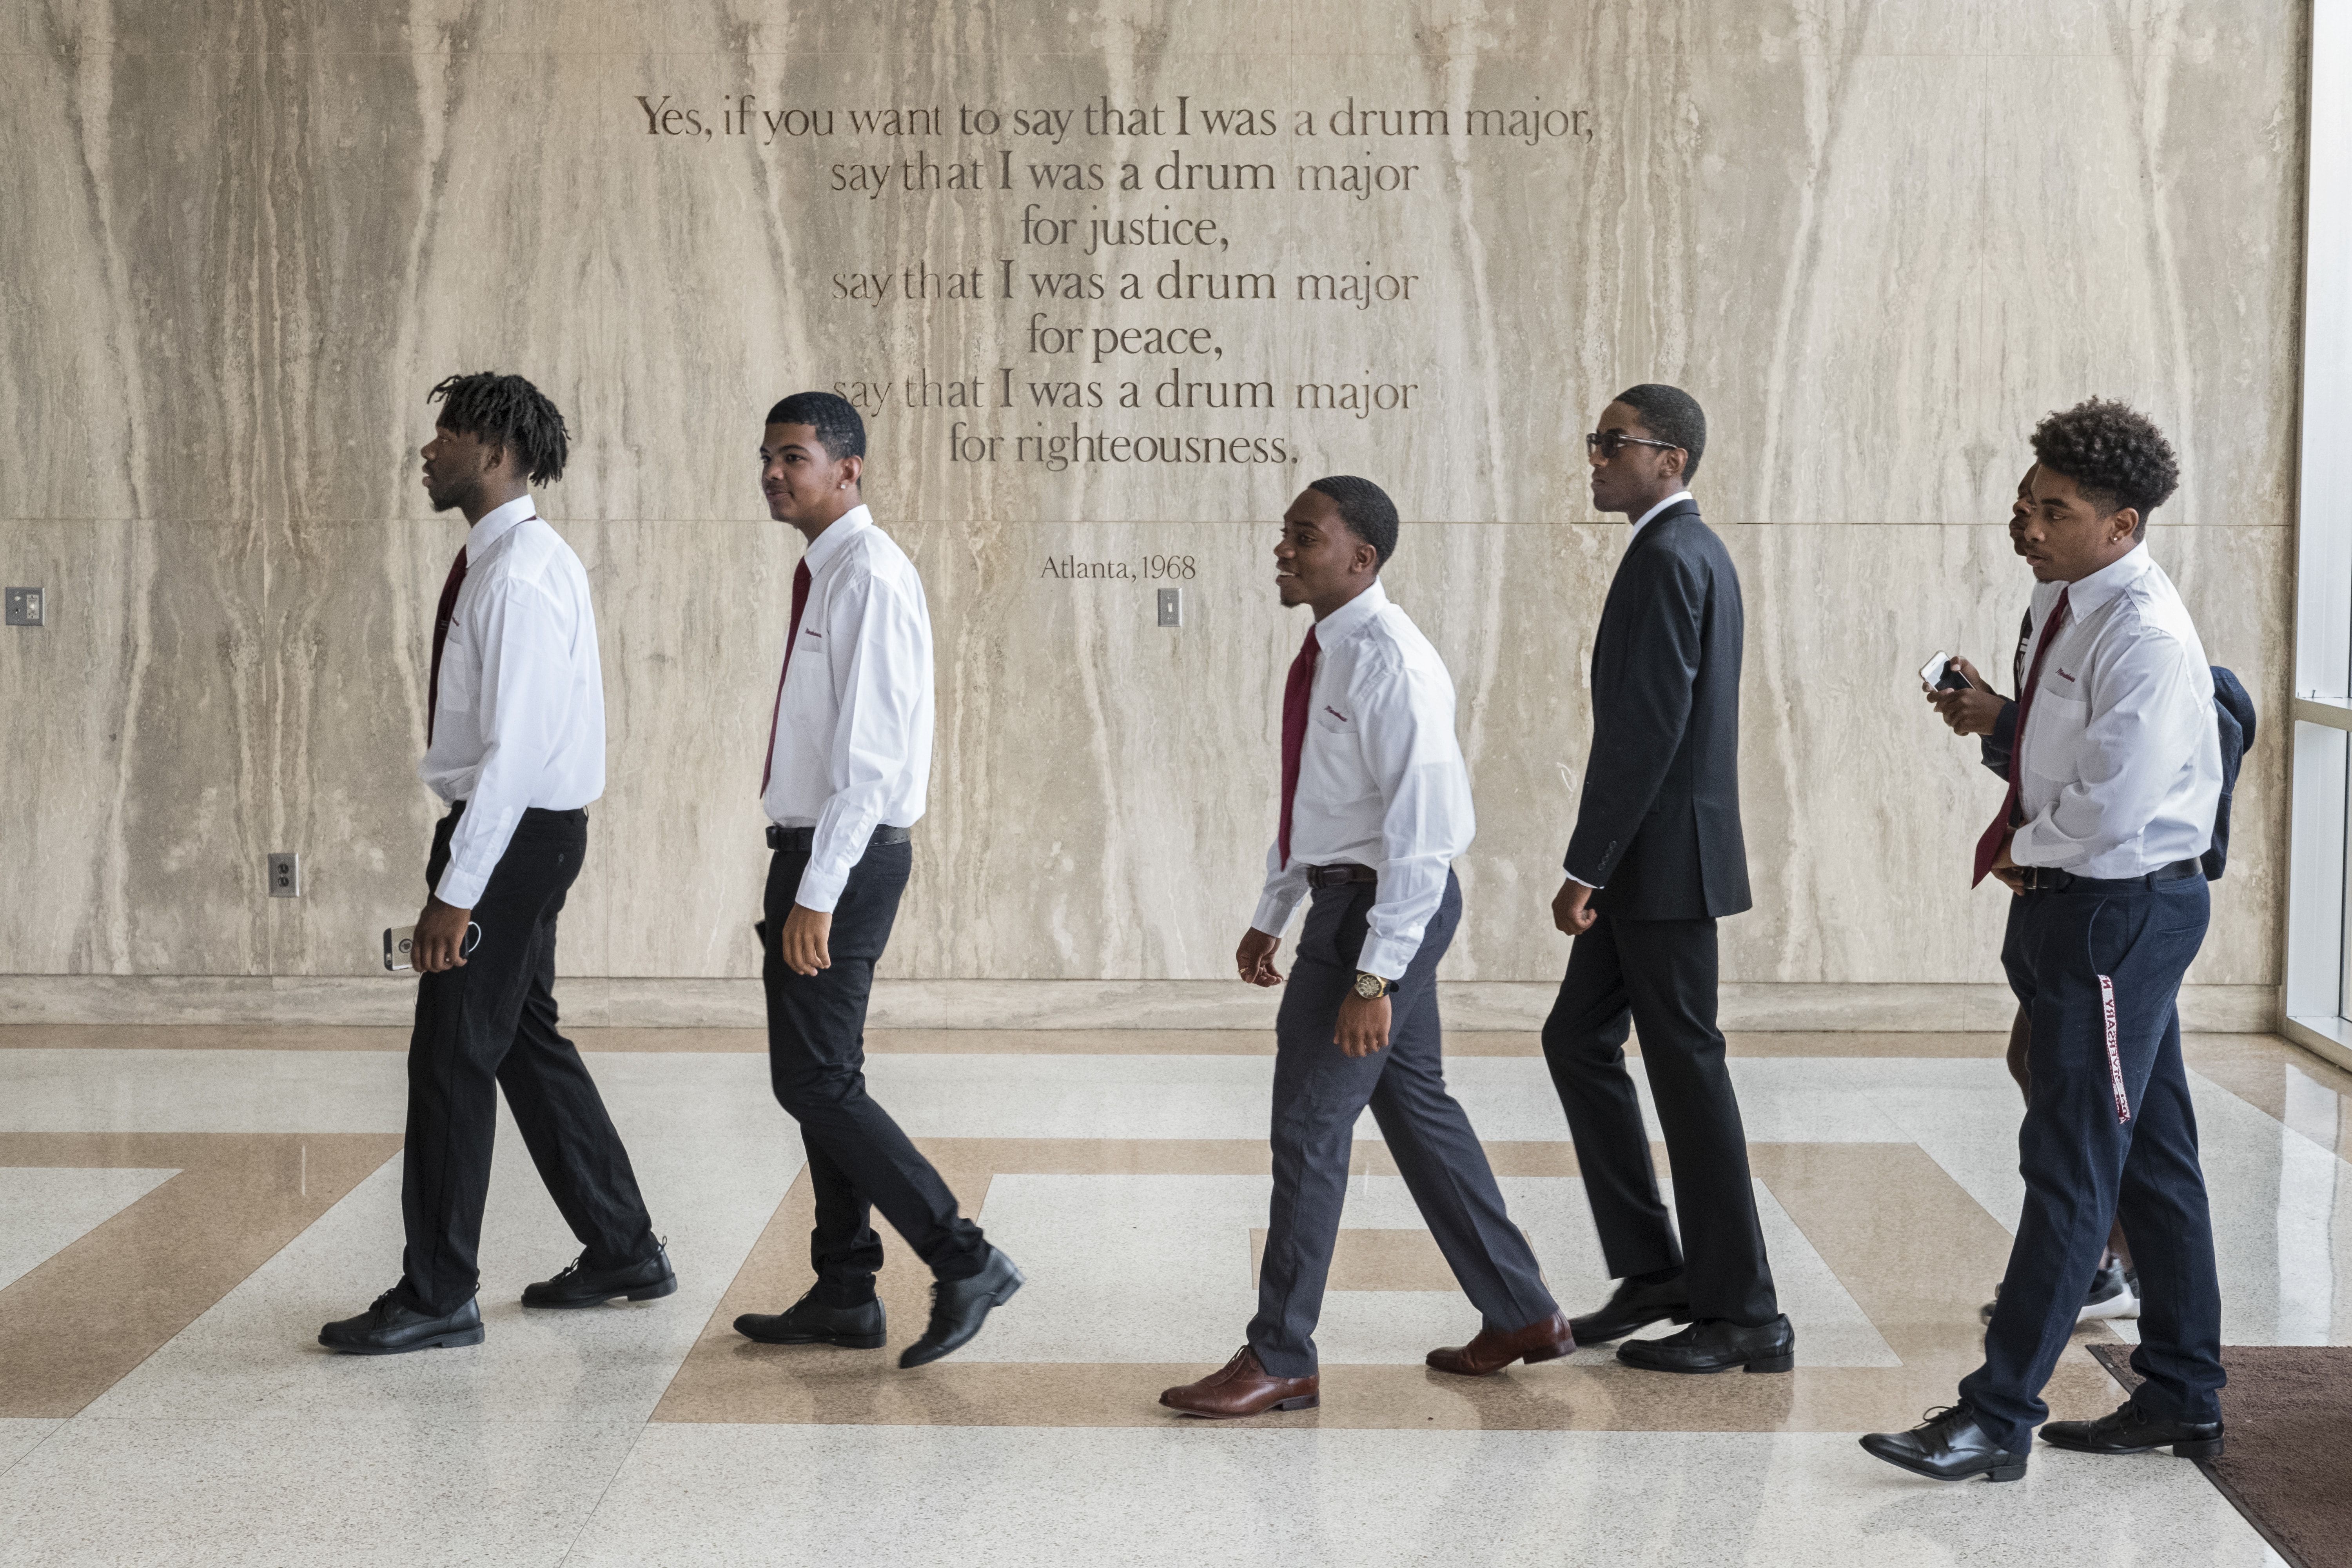 Freshmen enter the Morehouse chapel named for Martin Luther King, Jr., whose words are etched on the wall. The weekly, required Crown Forum assembly introduces leaders who address issues of the day. The all-male college aims to develop disciplined men who will lead lives of scholarship and service. Image by Radcliffe "Ruddy" Roye. United States, 2017.
